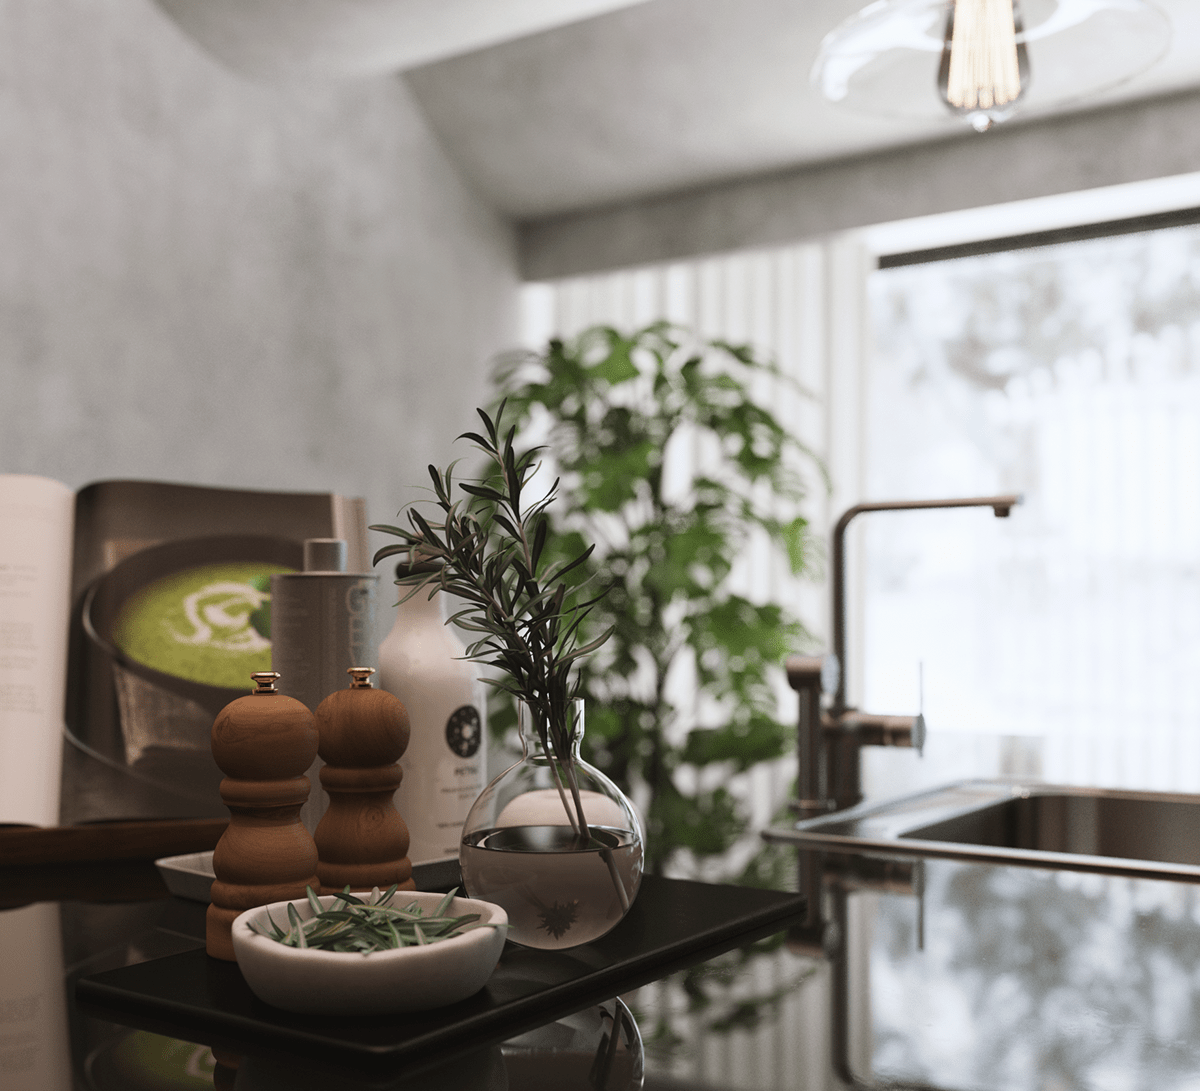 3d Visualizations cover kitchen